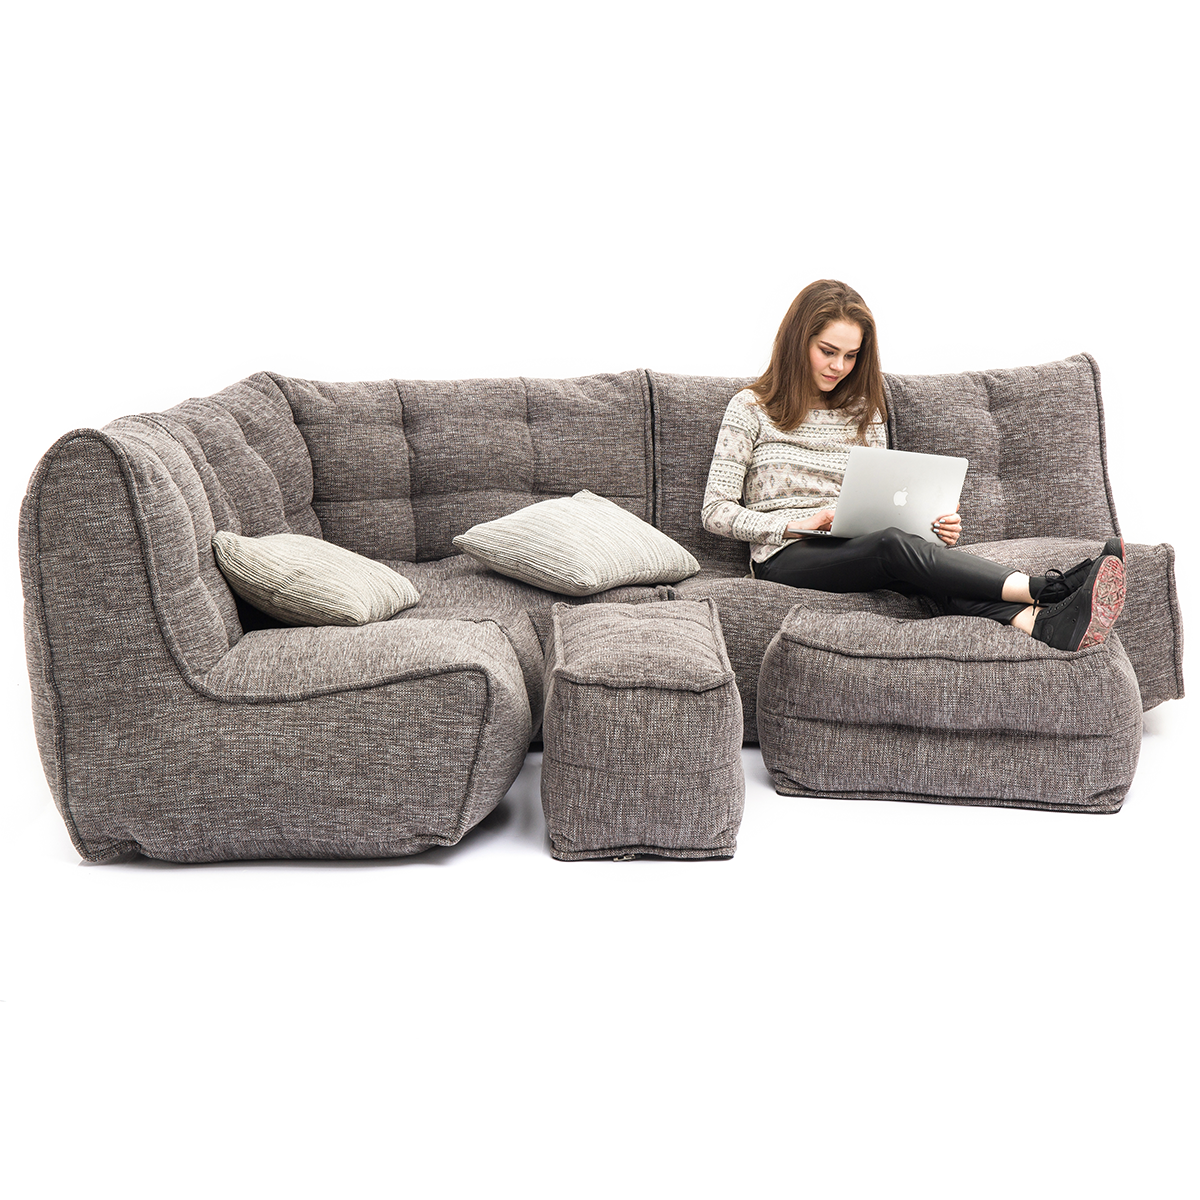 Settle into the body moulding comfort of MODULAR bean bag sofas (MOD 5 Living Lounge configuration in Luscious Grey)